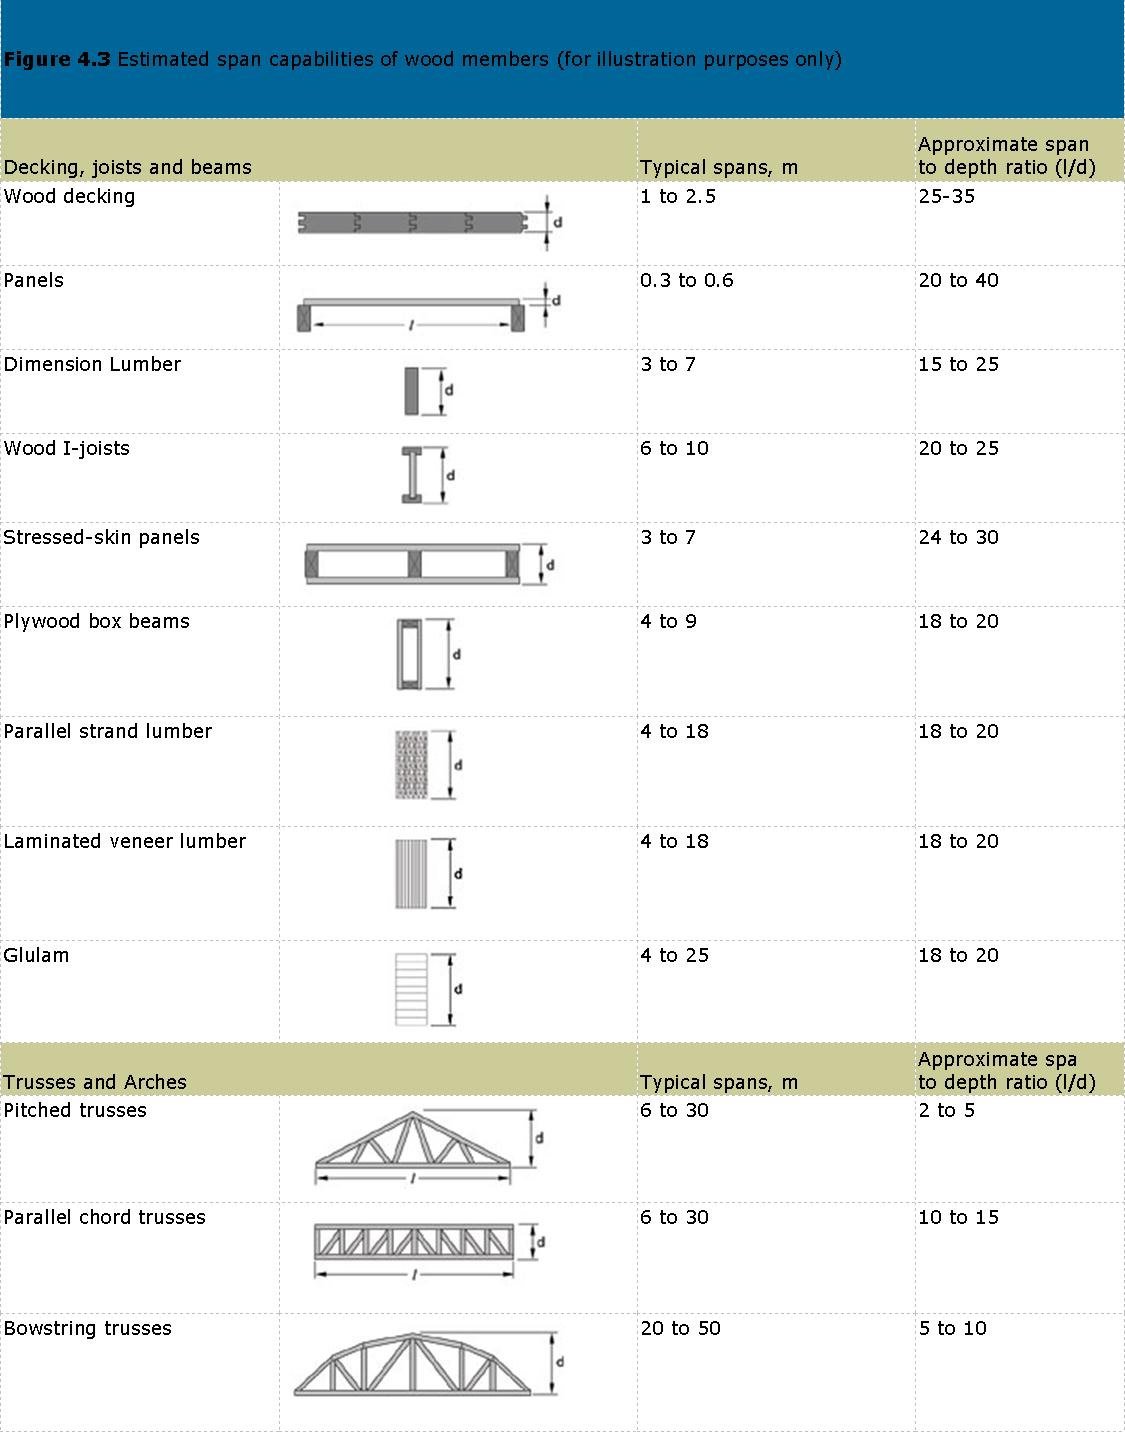 Estimated span capabilities of wood members in structural design for decking joists, beams, trusses and arches.